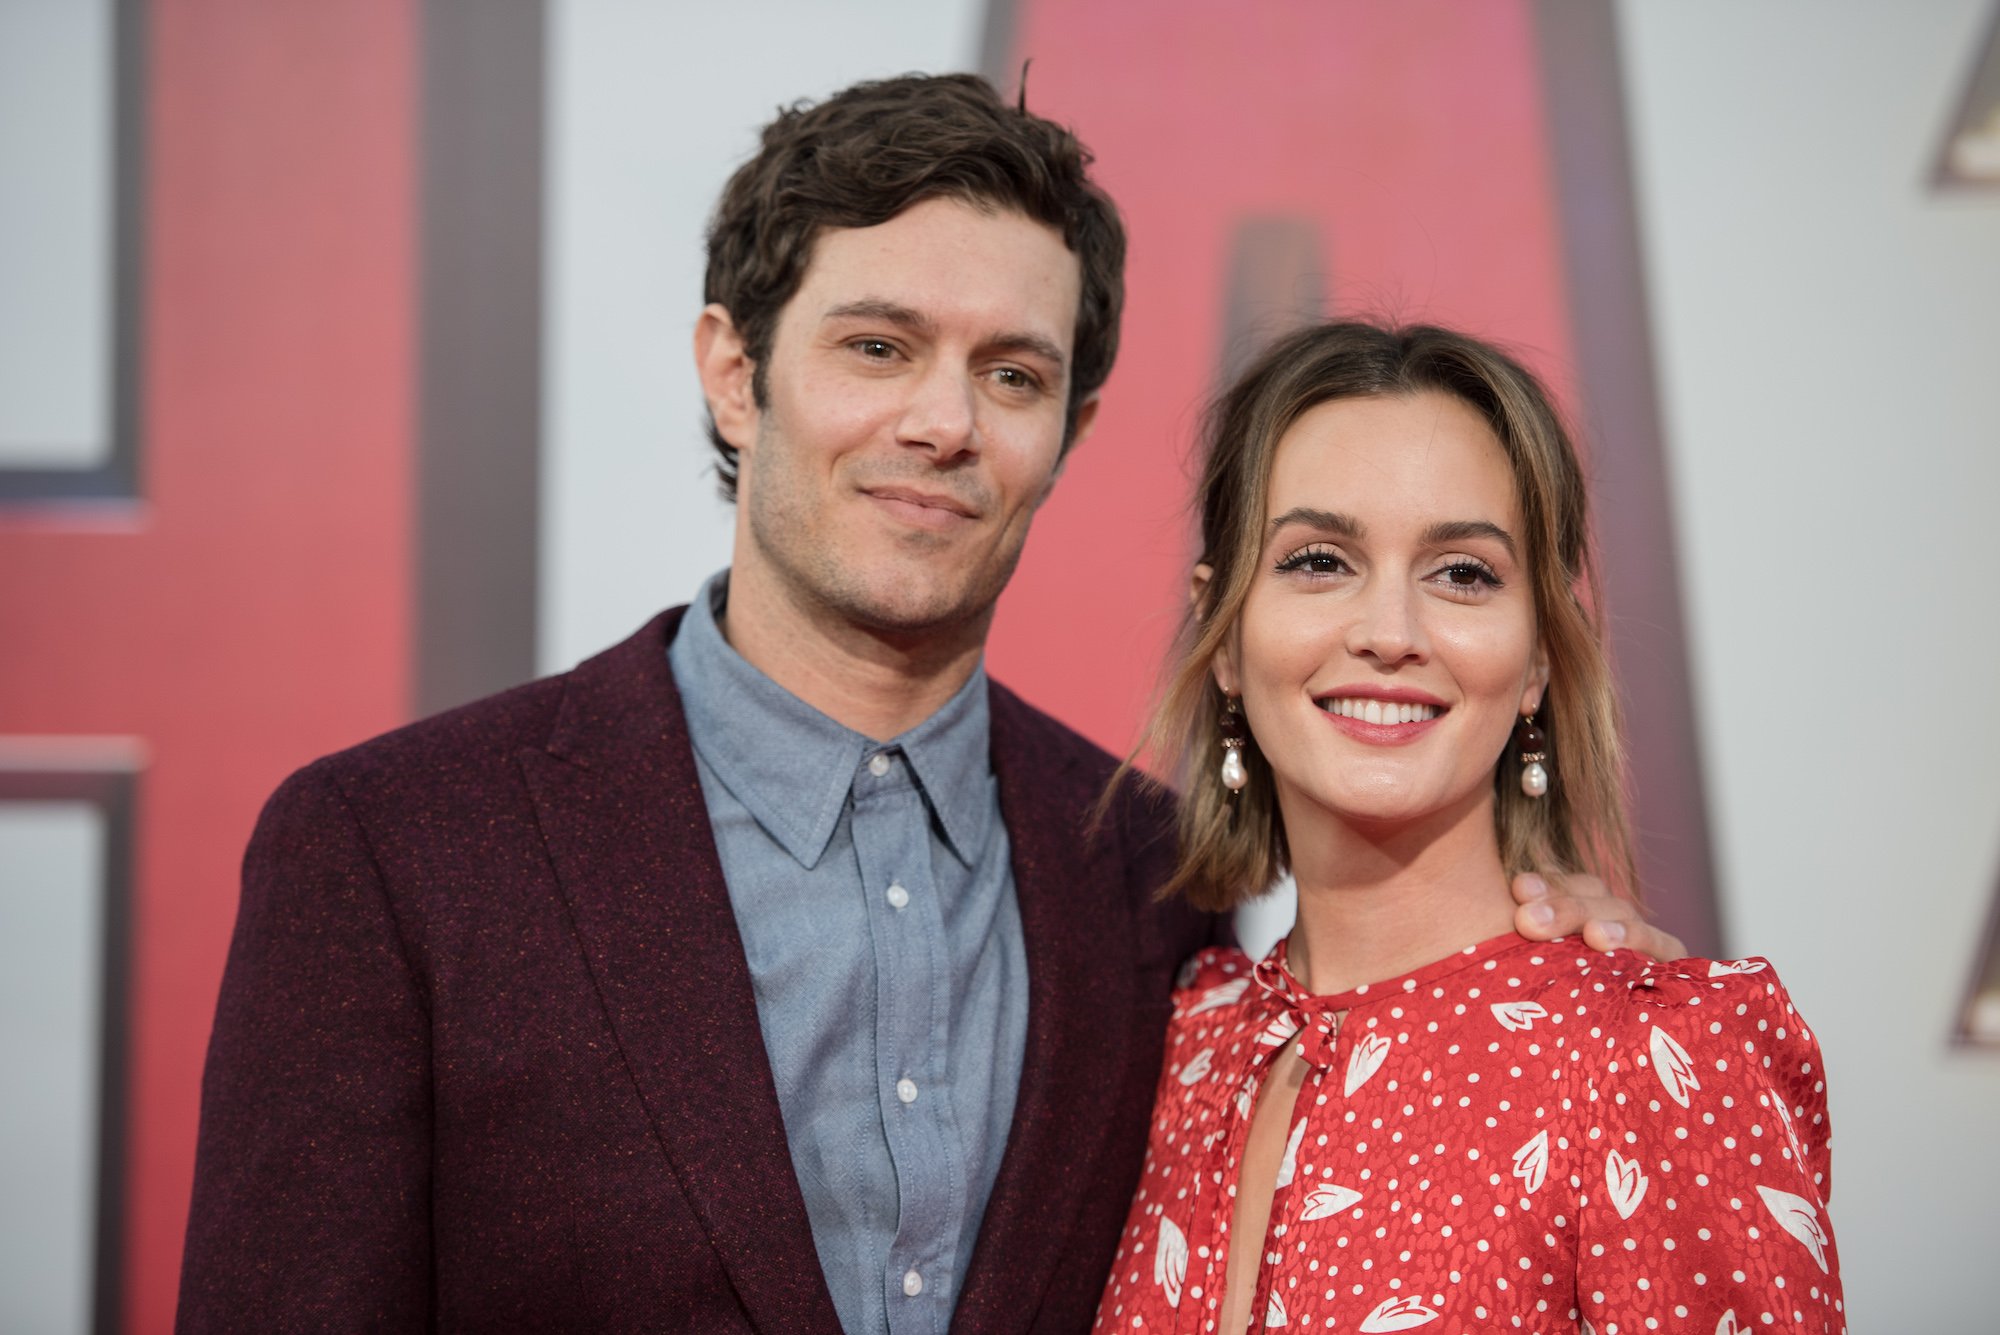 (L-R) Adam Brody and Leighton Meester smiling in front of a blurred background